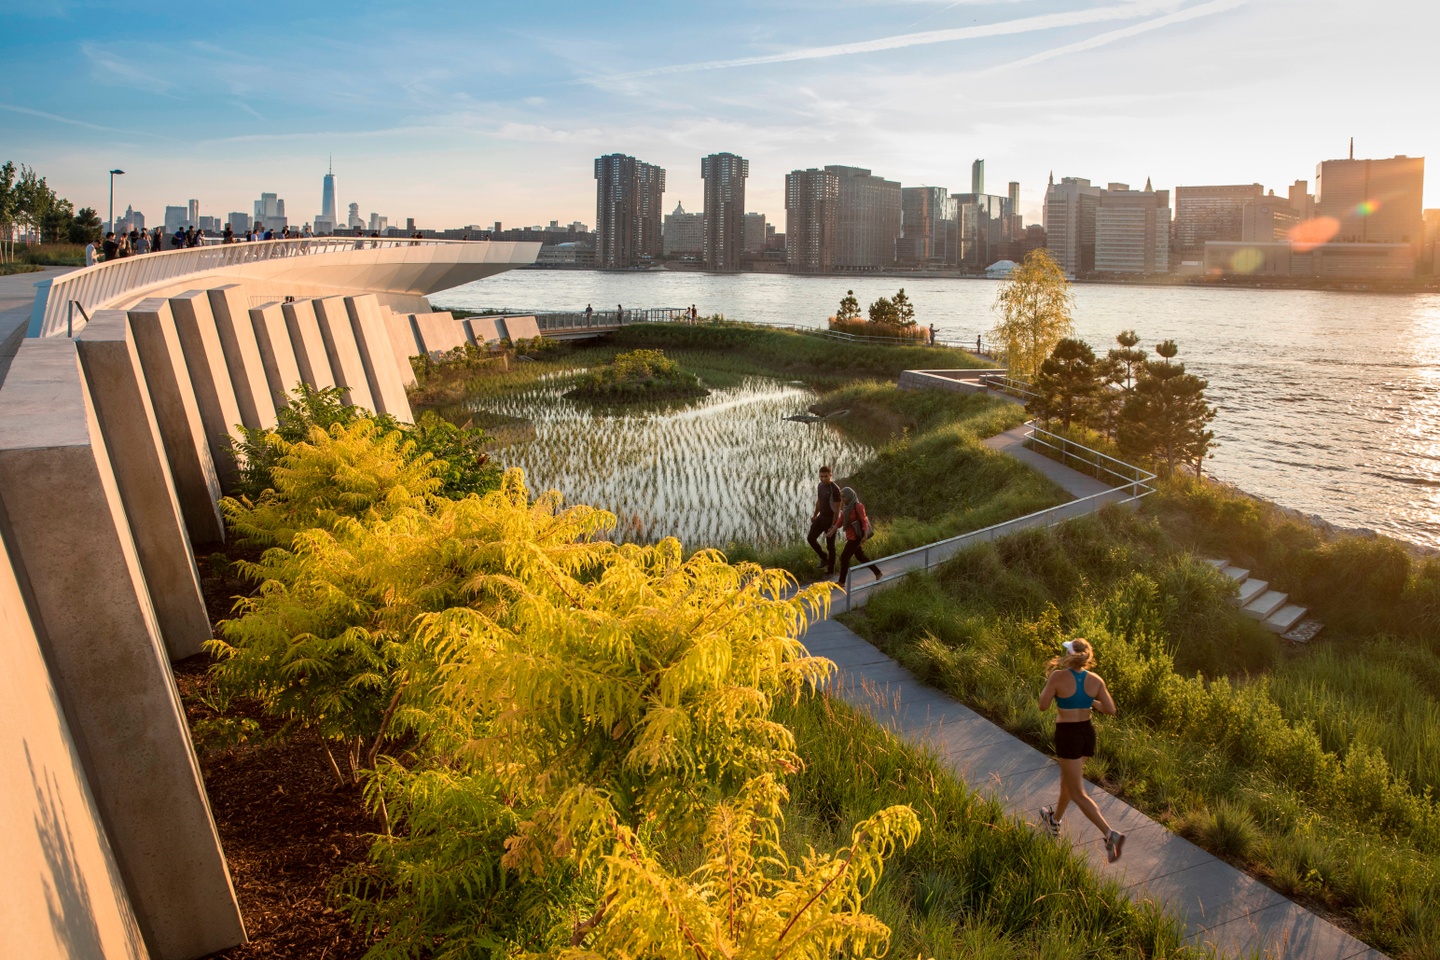 WEISS/MANFREDI, Hunter’s Point South Waterfront Park, Long Island. The park’s recently completed second phase offers New Yorkers an “urban wilderness” that re-introduces wetlands and the water’s edge. (Photo: David Lloyd / SWA)